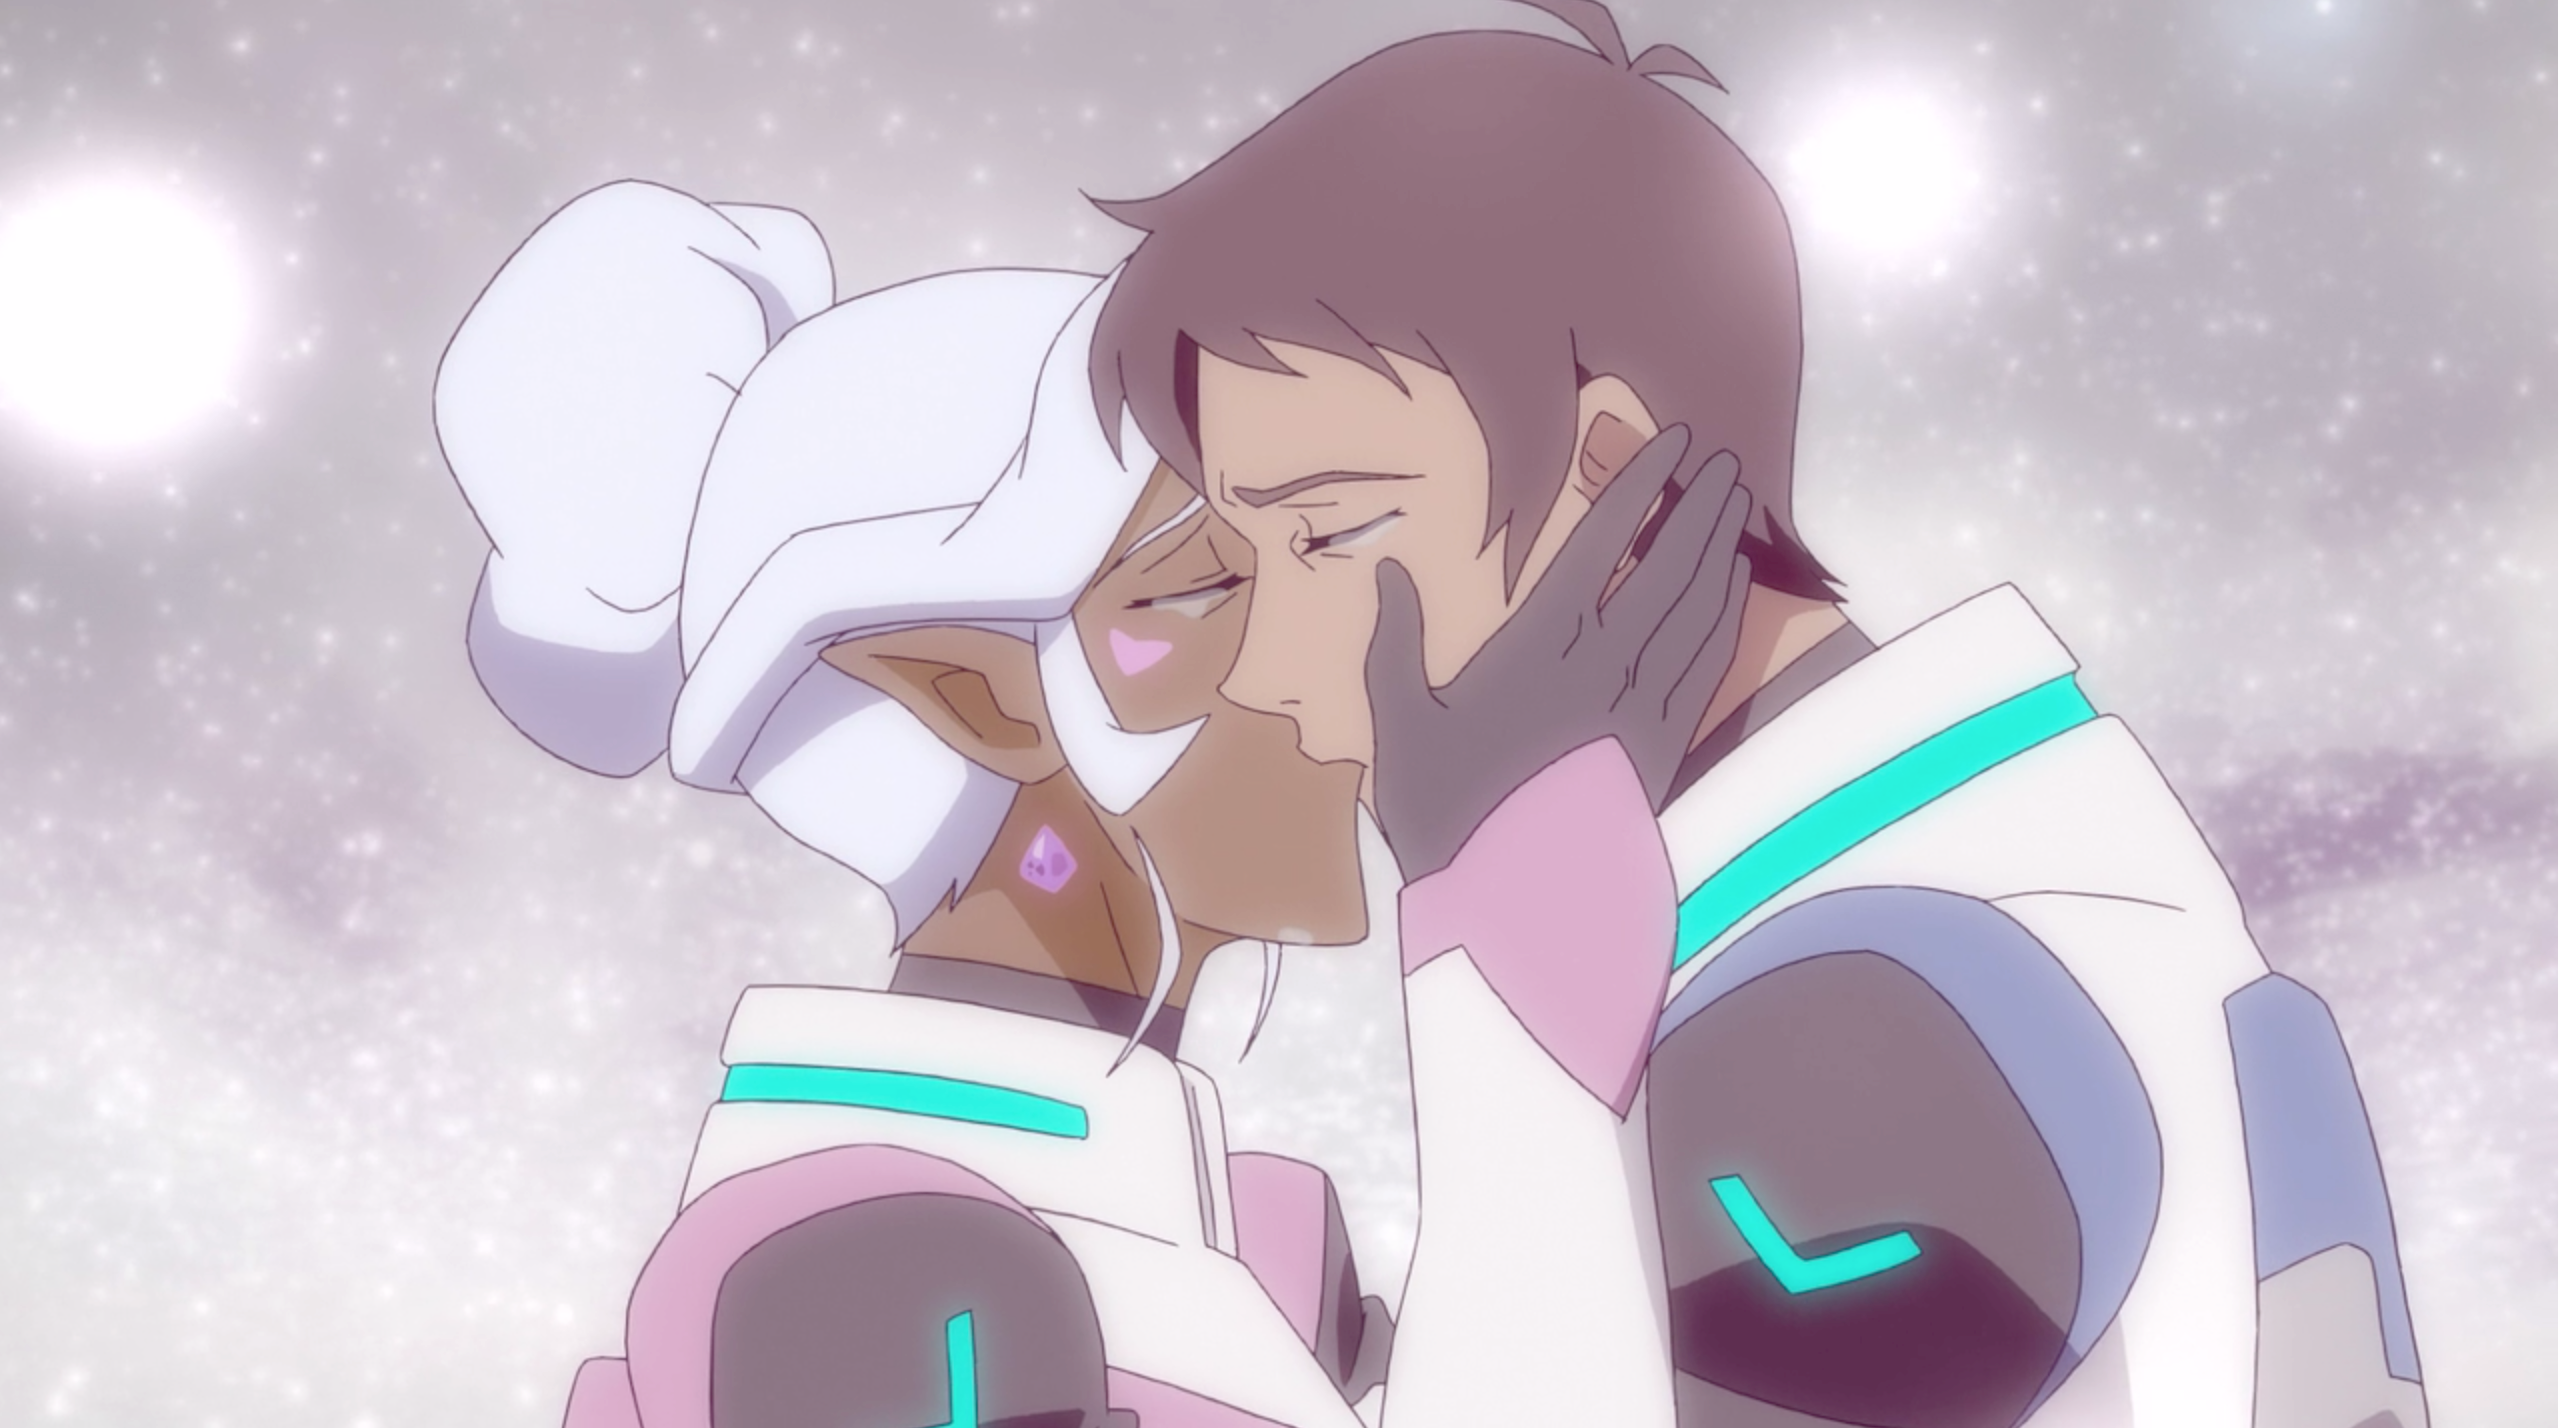 The thrilling ending of Voltron was never going to deliver on fan demands